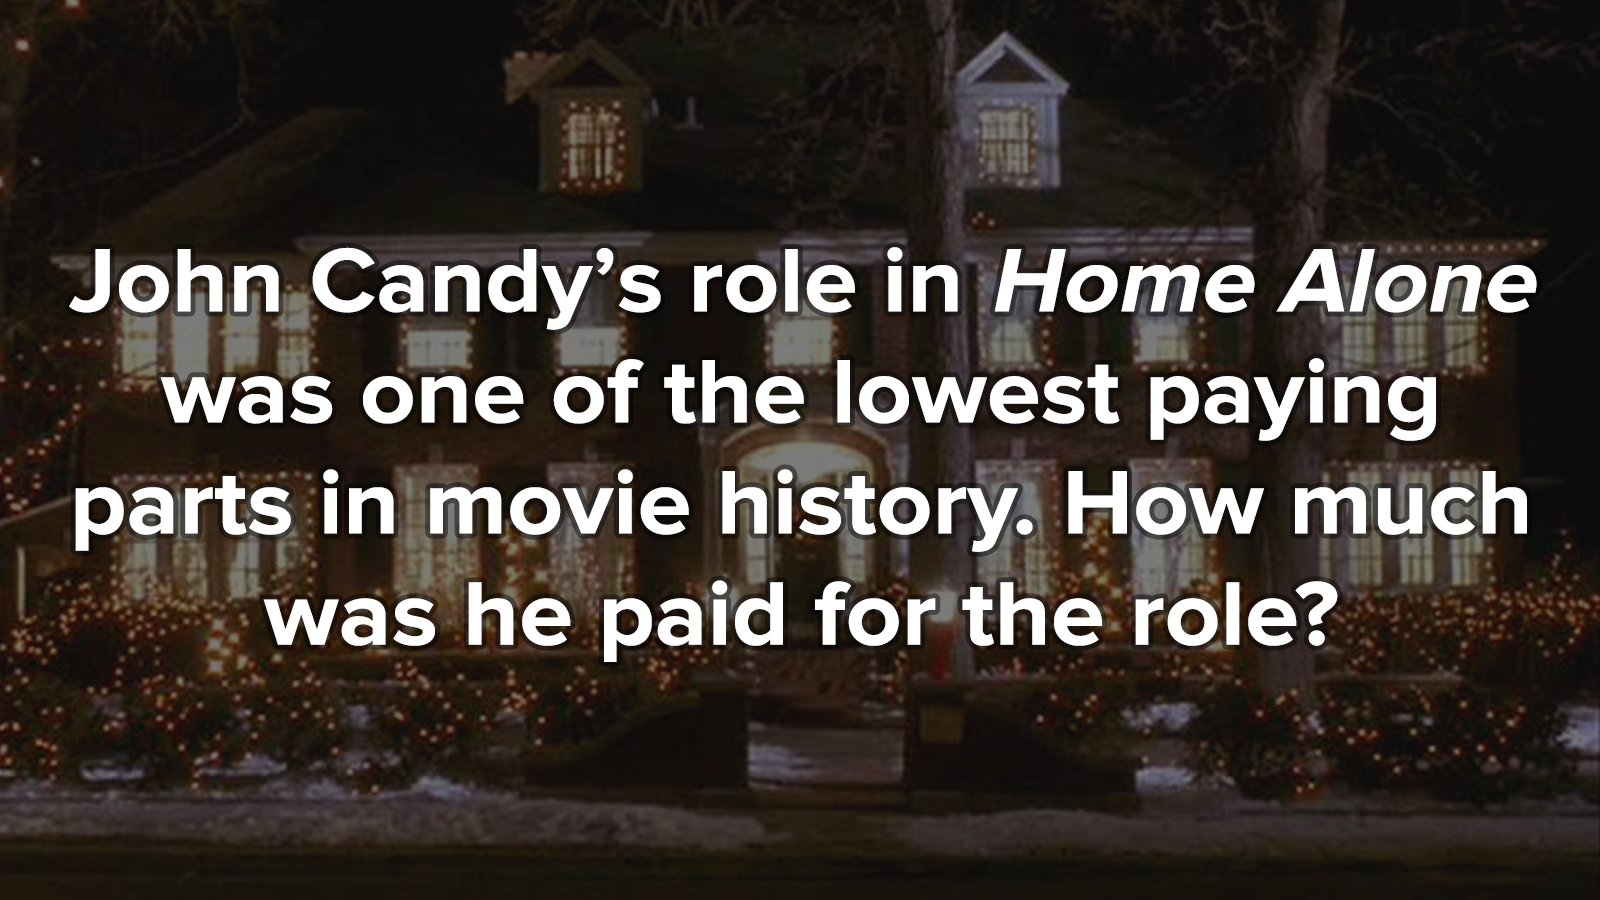 The Daily Crate | EDUCRATED QUIZ: Home Alone Trivia